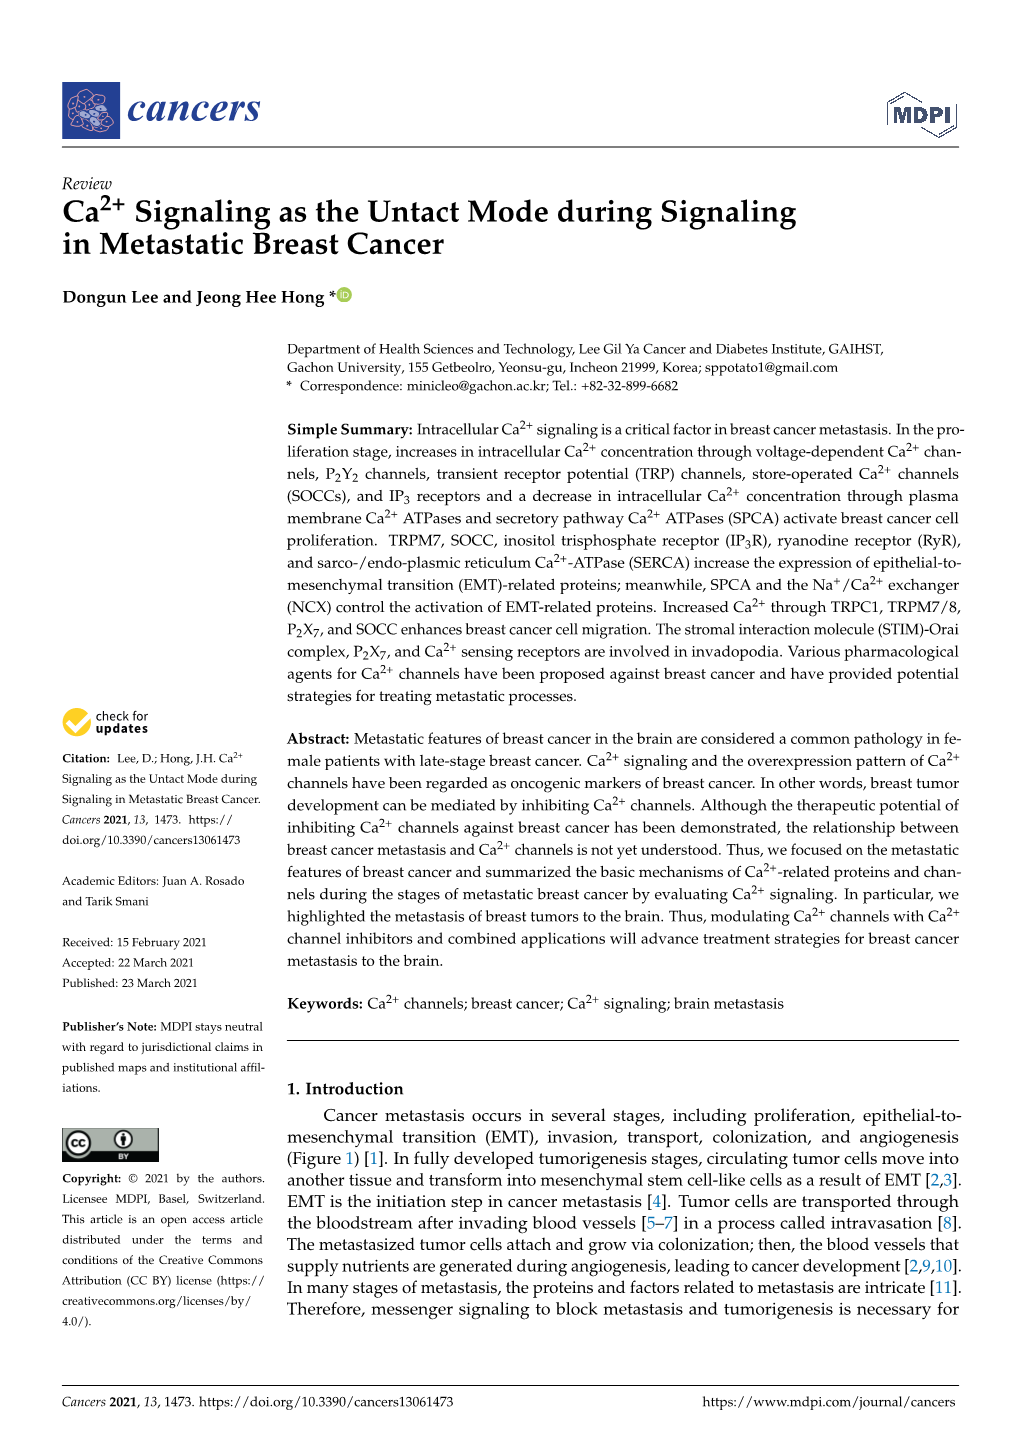 Signaling As the Untact Mode During Signaling in Metastatic Breast Cancer